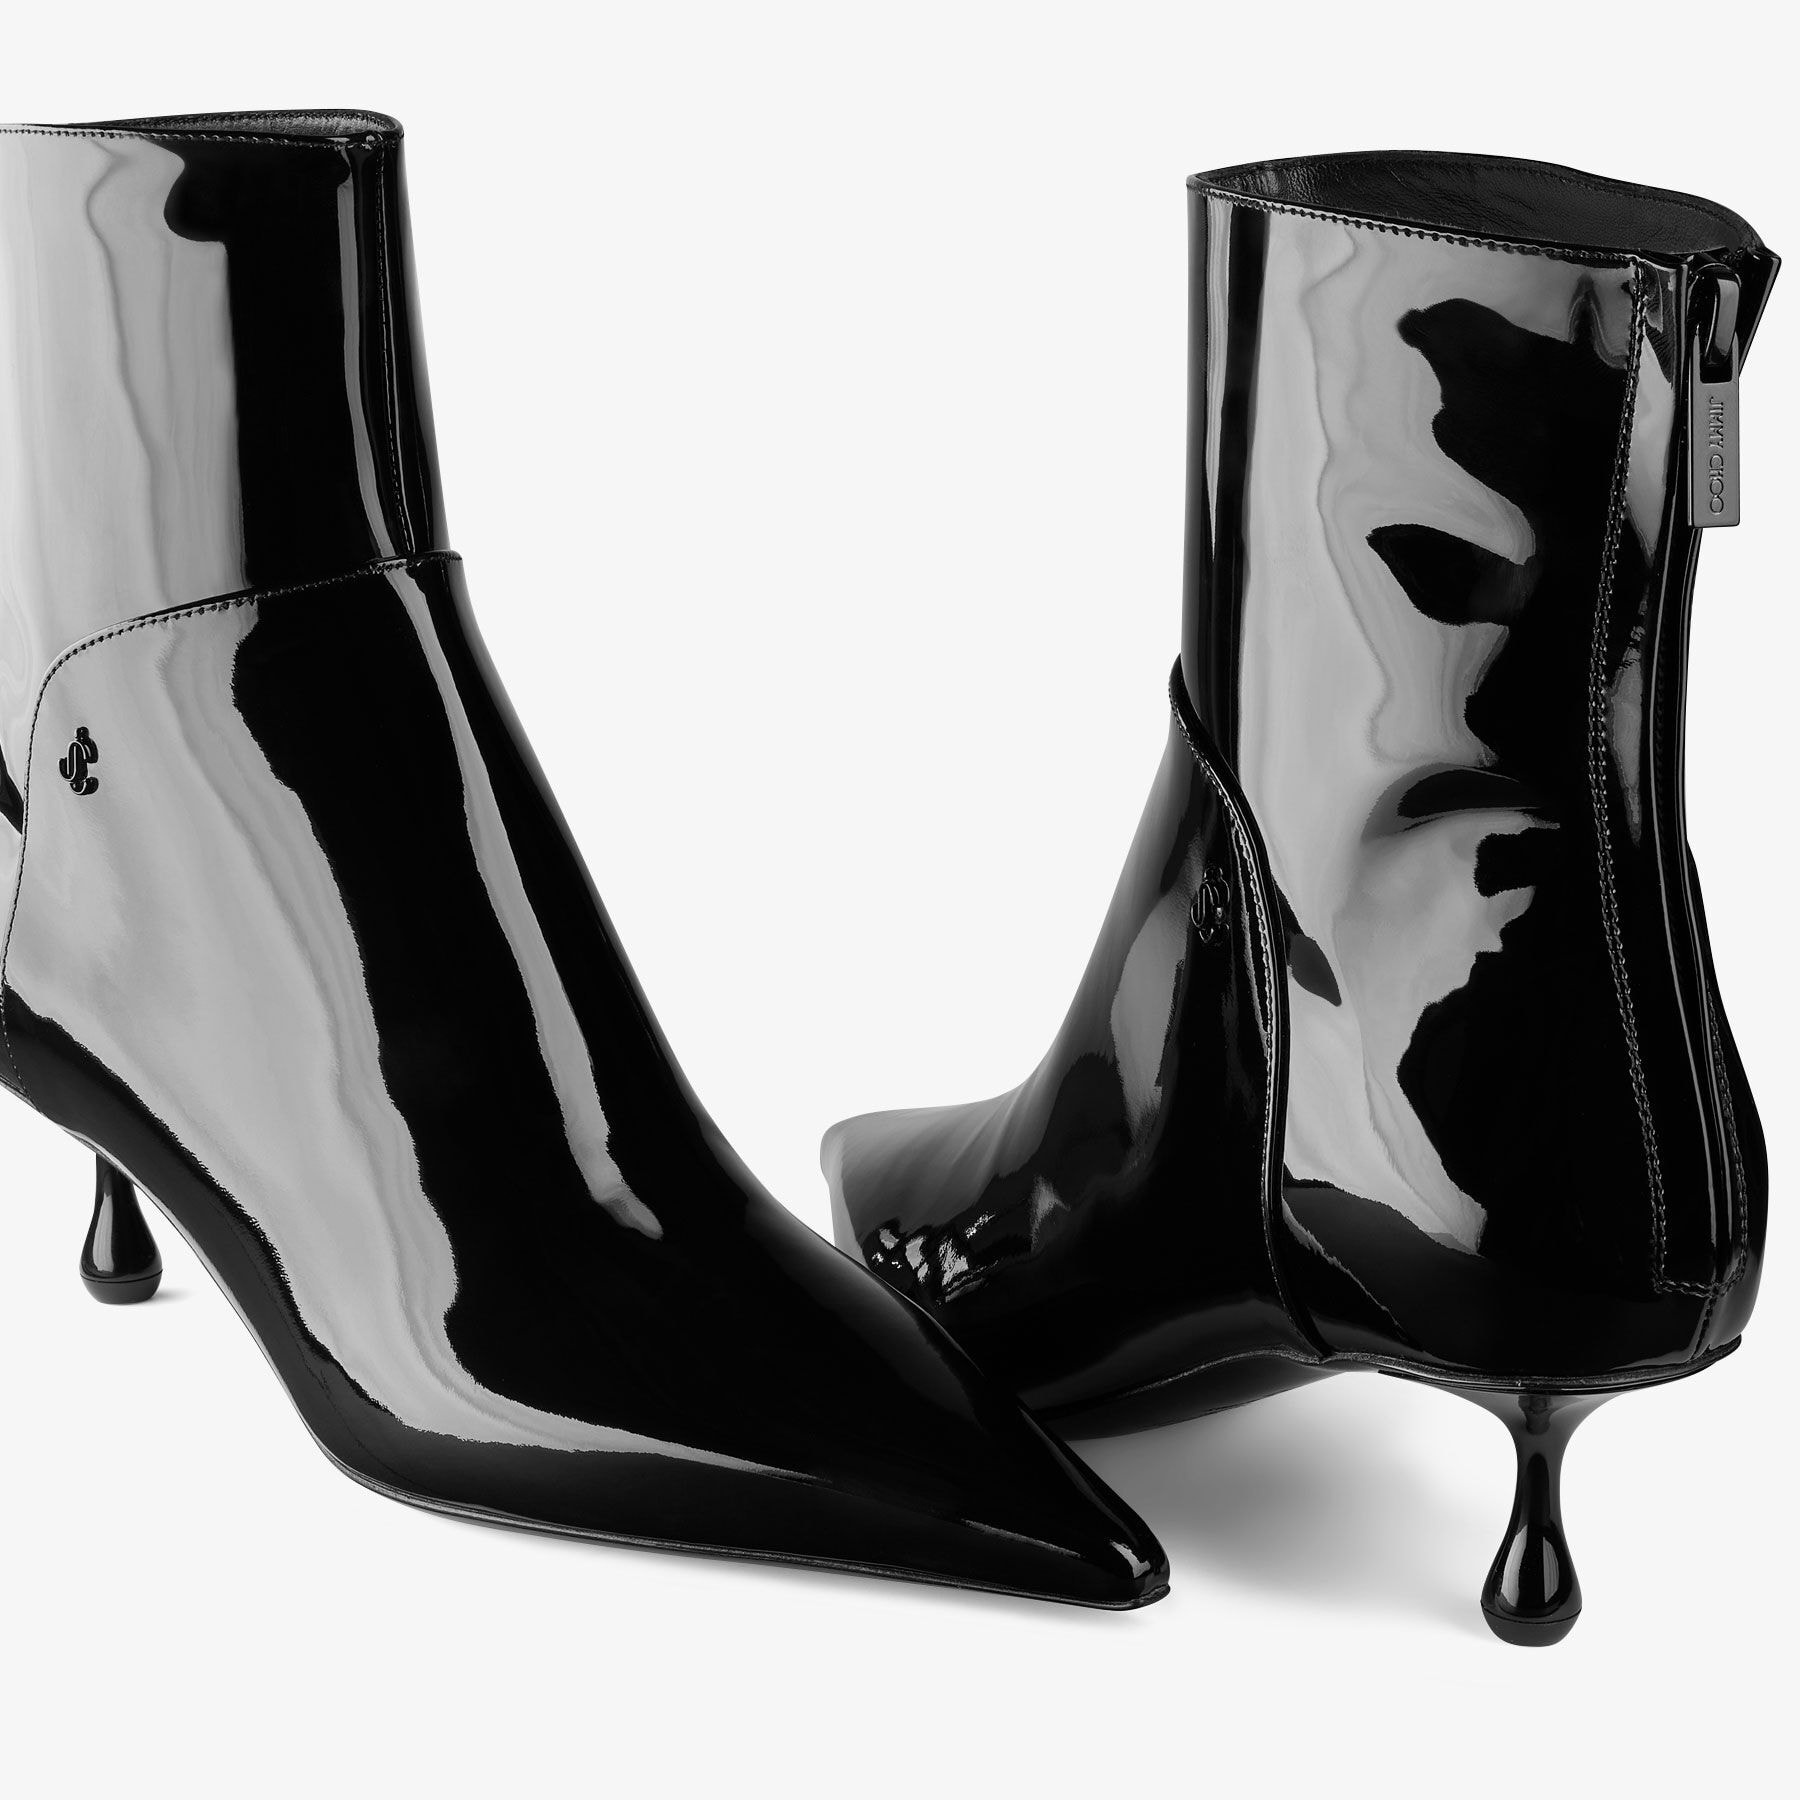 Cycas Ankle Boot 50
Black Patent Leather Ankle Boots - 4